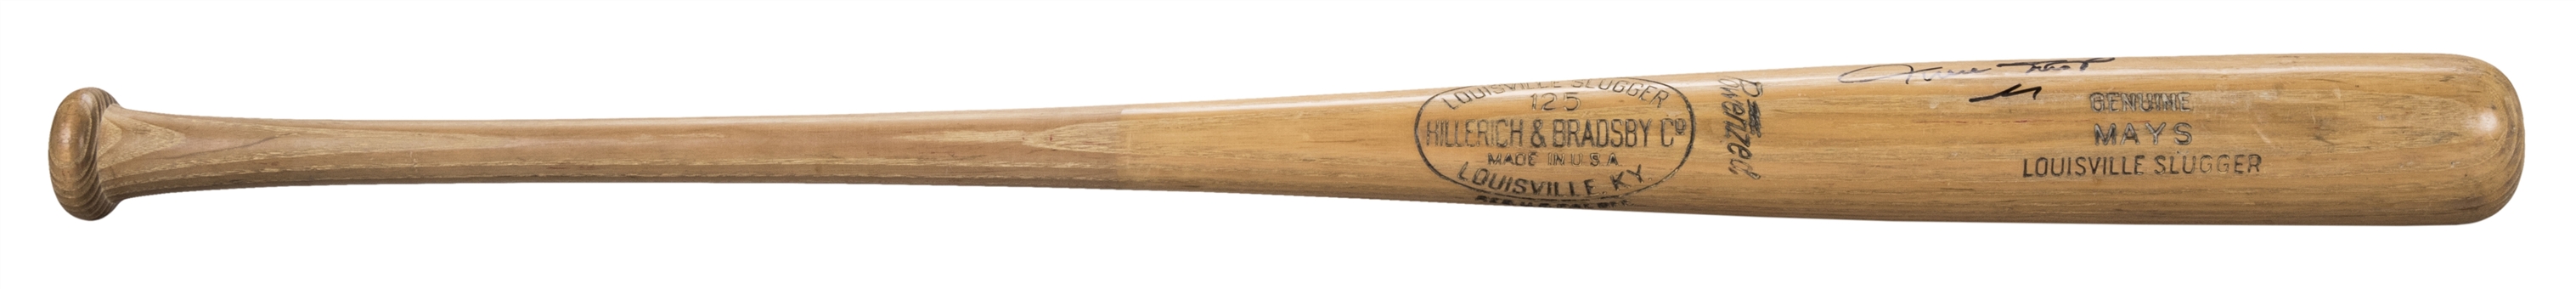 1960 Willie Mays Game Used and Signed Hillerich & Bradsby S2 Model Bat (PSA/DNA GU 9 & Beckett)